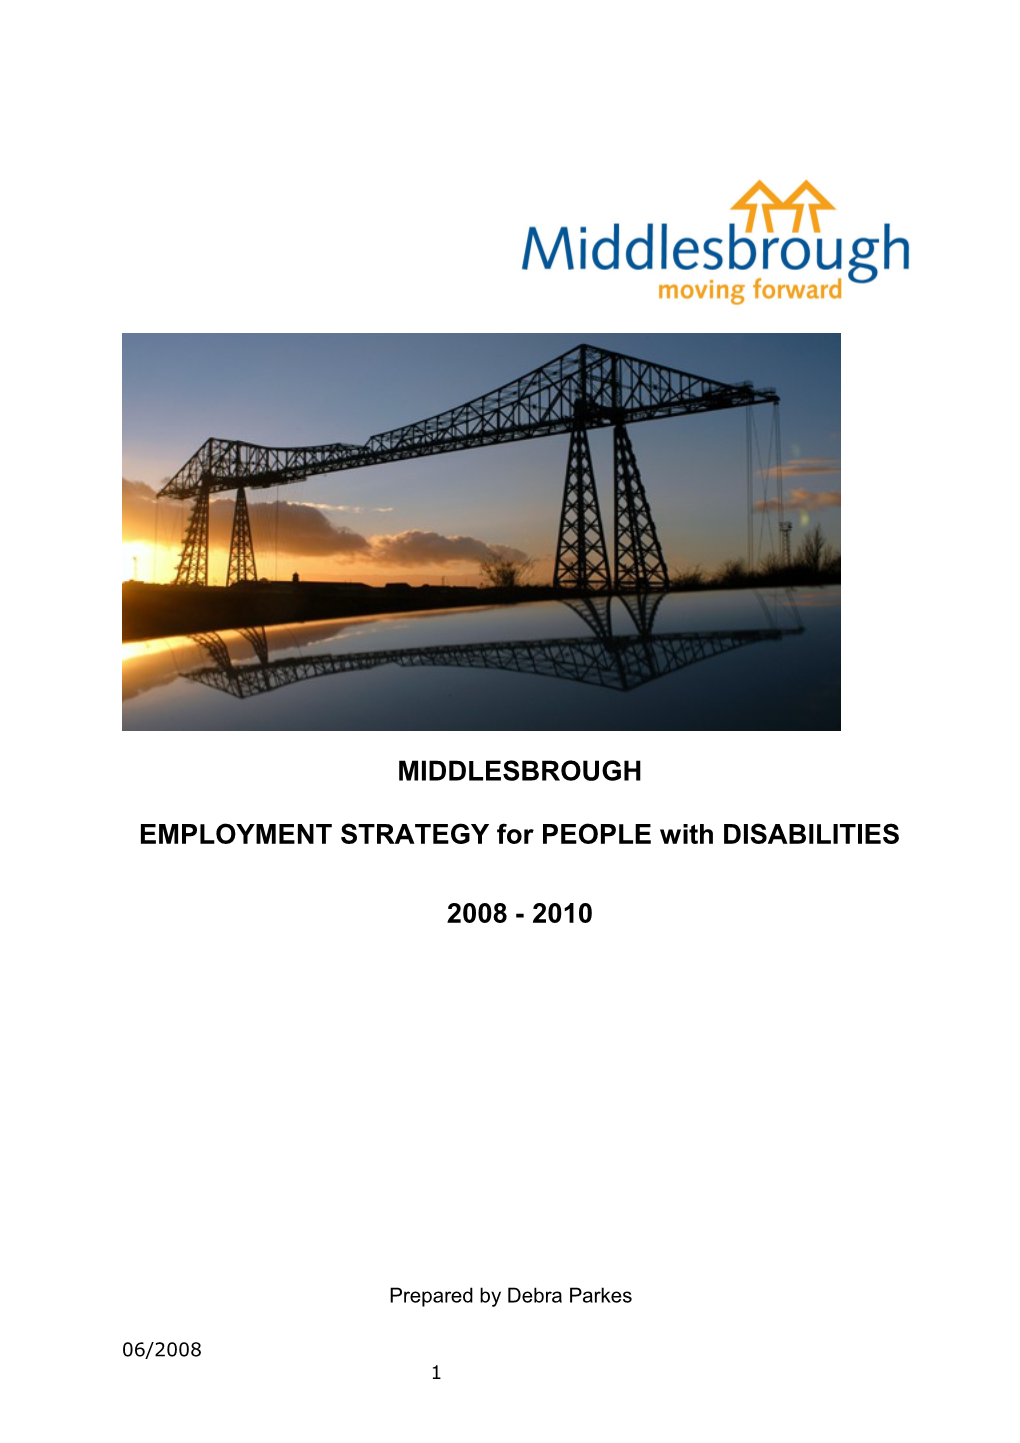 EMPLOYMENT STRATEGY for PEOPLE with DISABILITIES